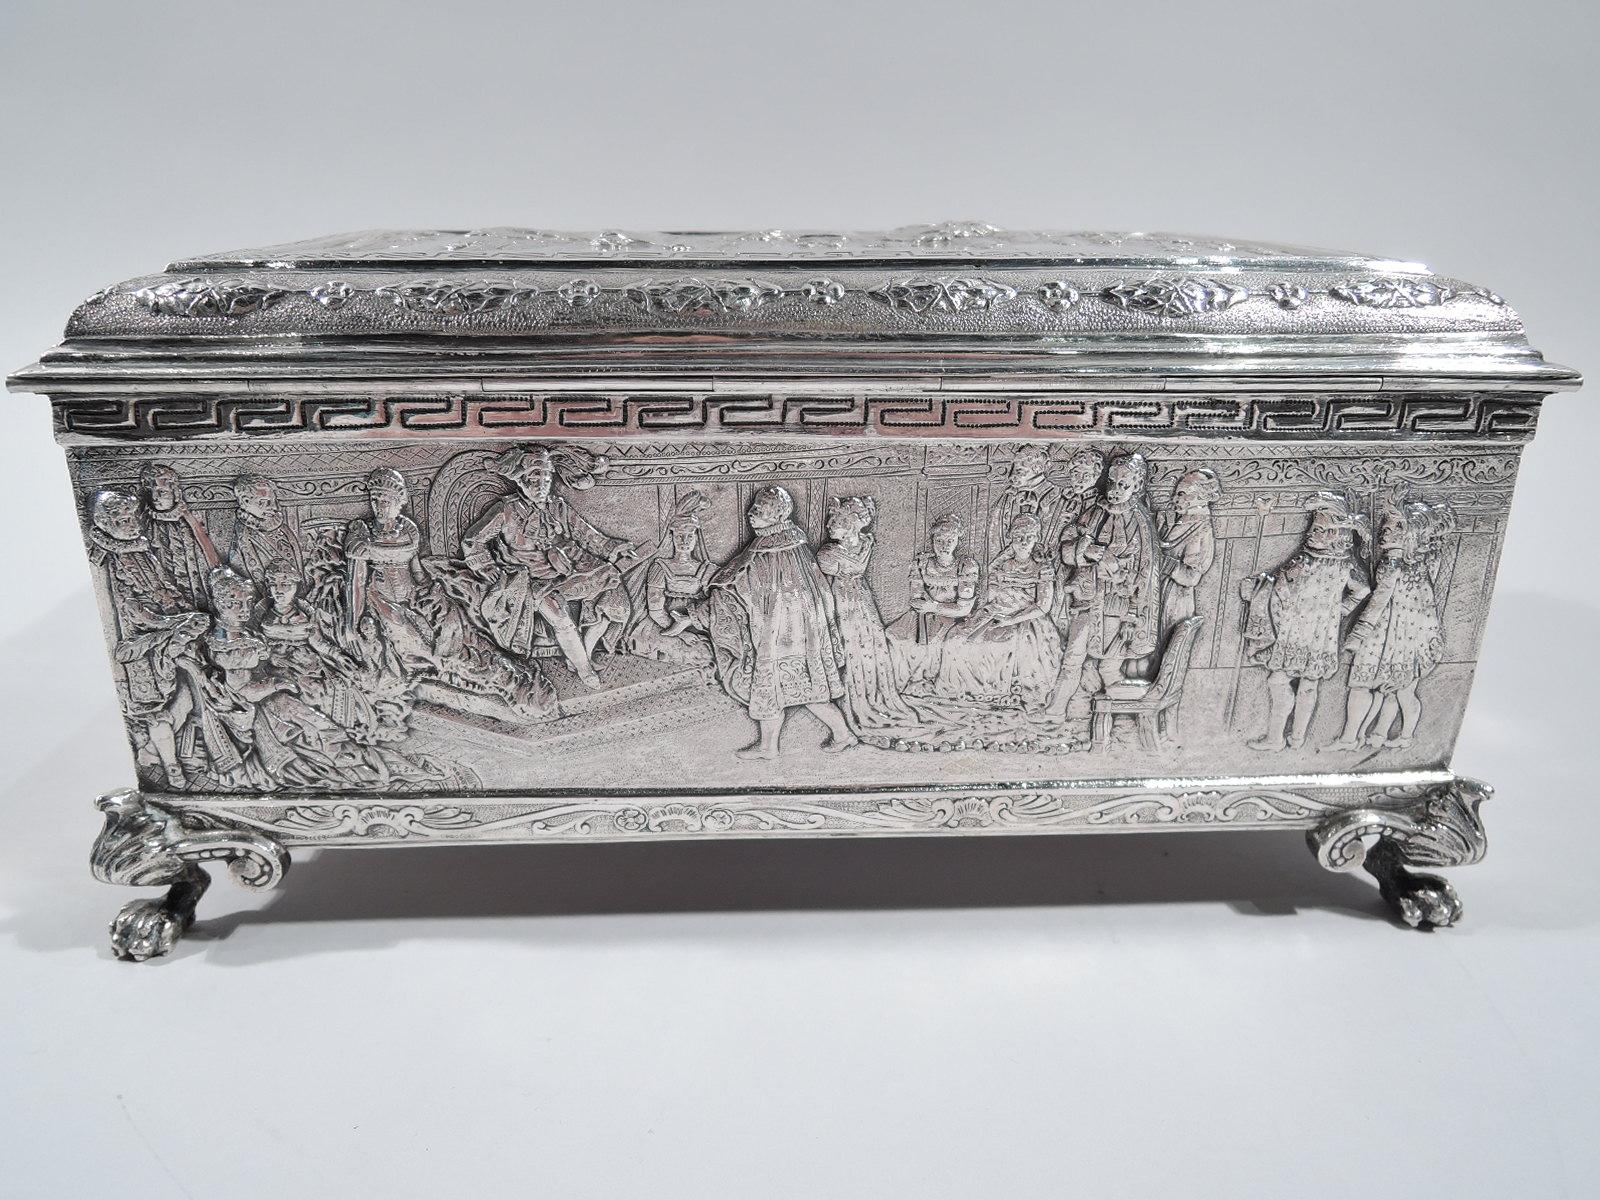 Early 20th Century Antique German Silver Casket Box with Scenes of Napoleon’s Life